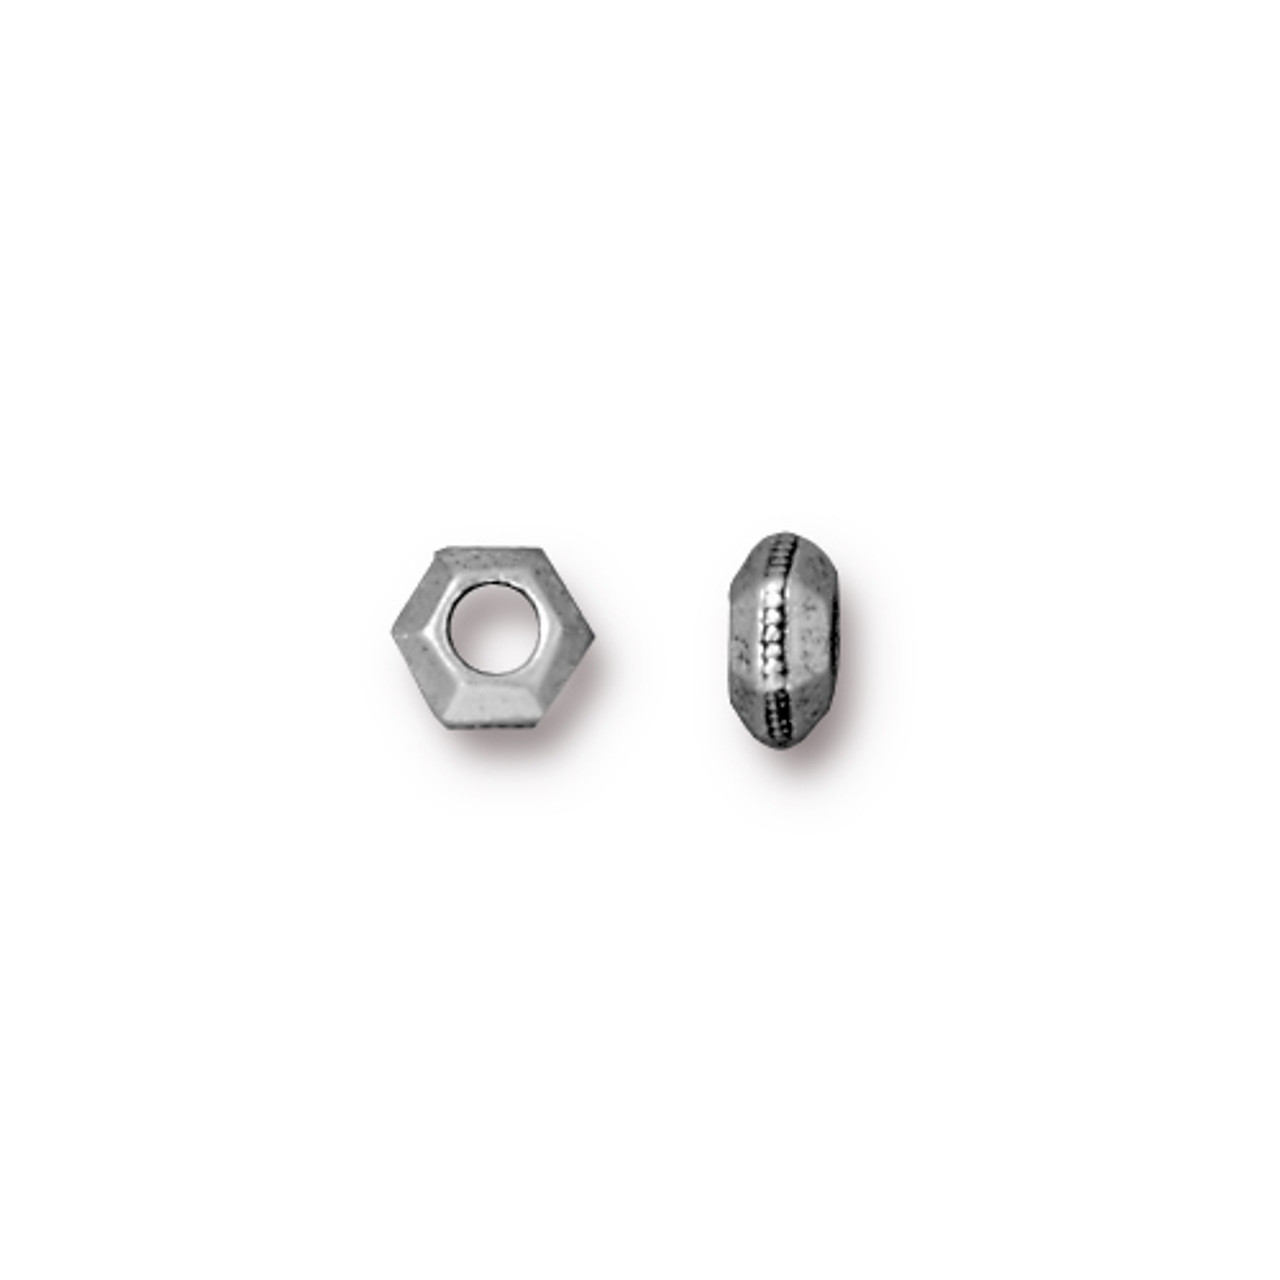 Faceted Large Hole Spacer Bead 5mm, Antiqued Silver Plate, 100 per Pack -  TierraCast, Inc.